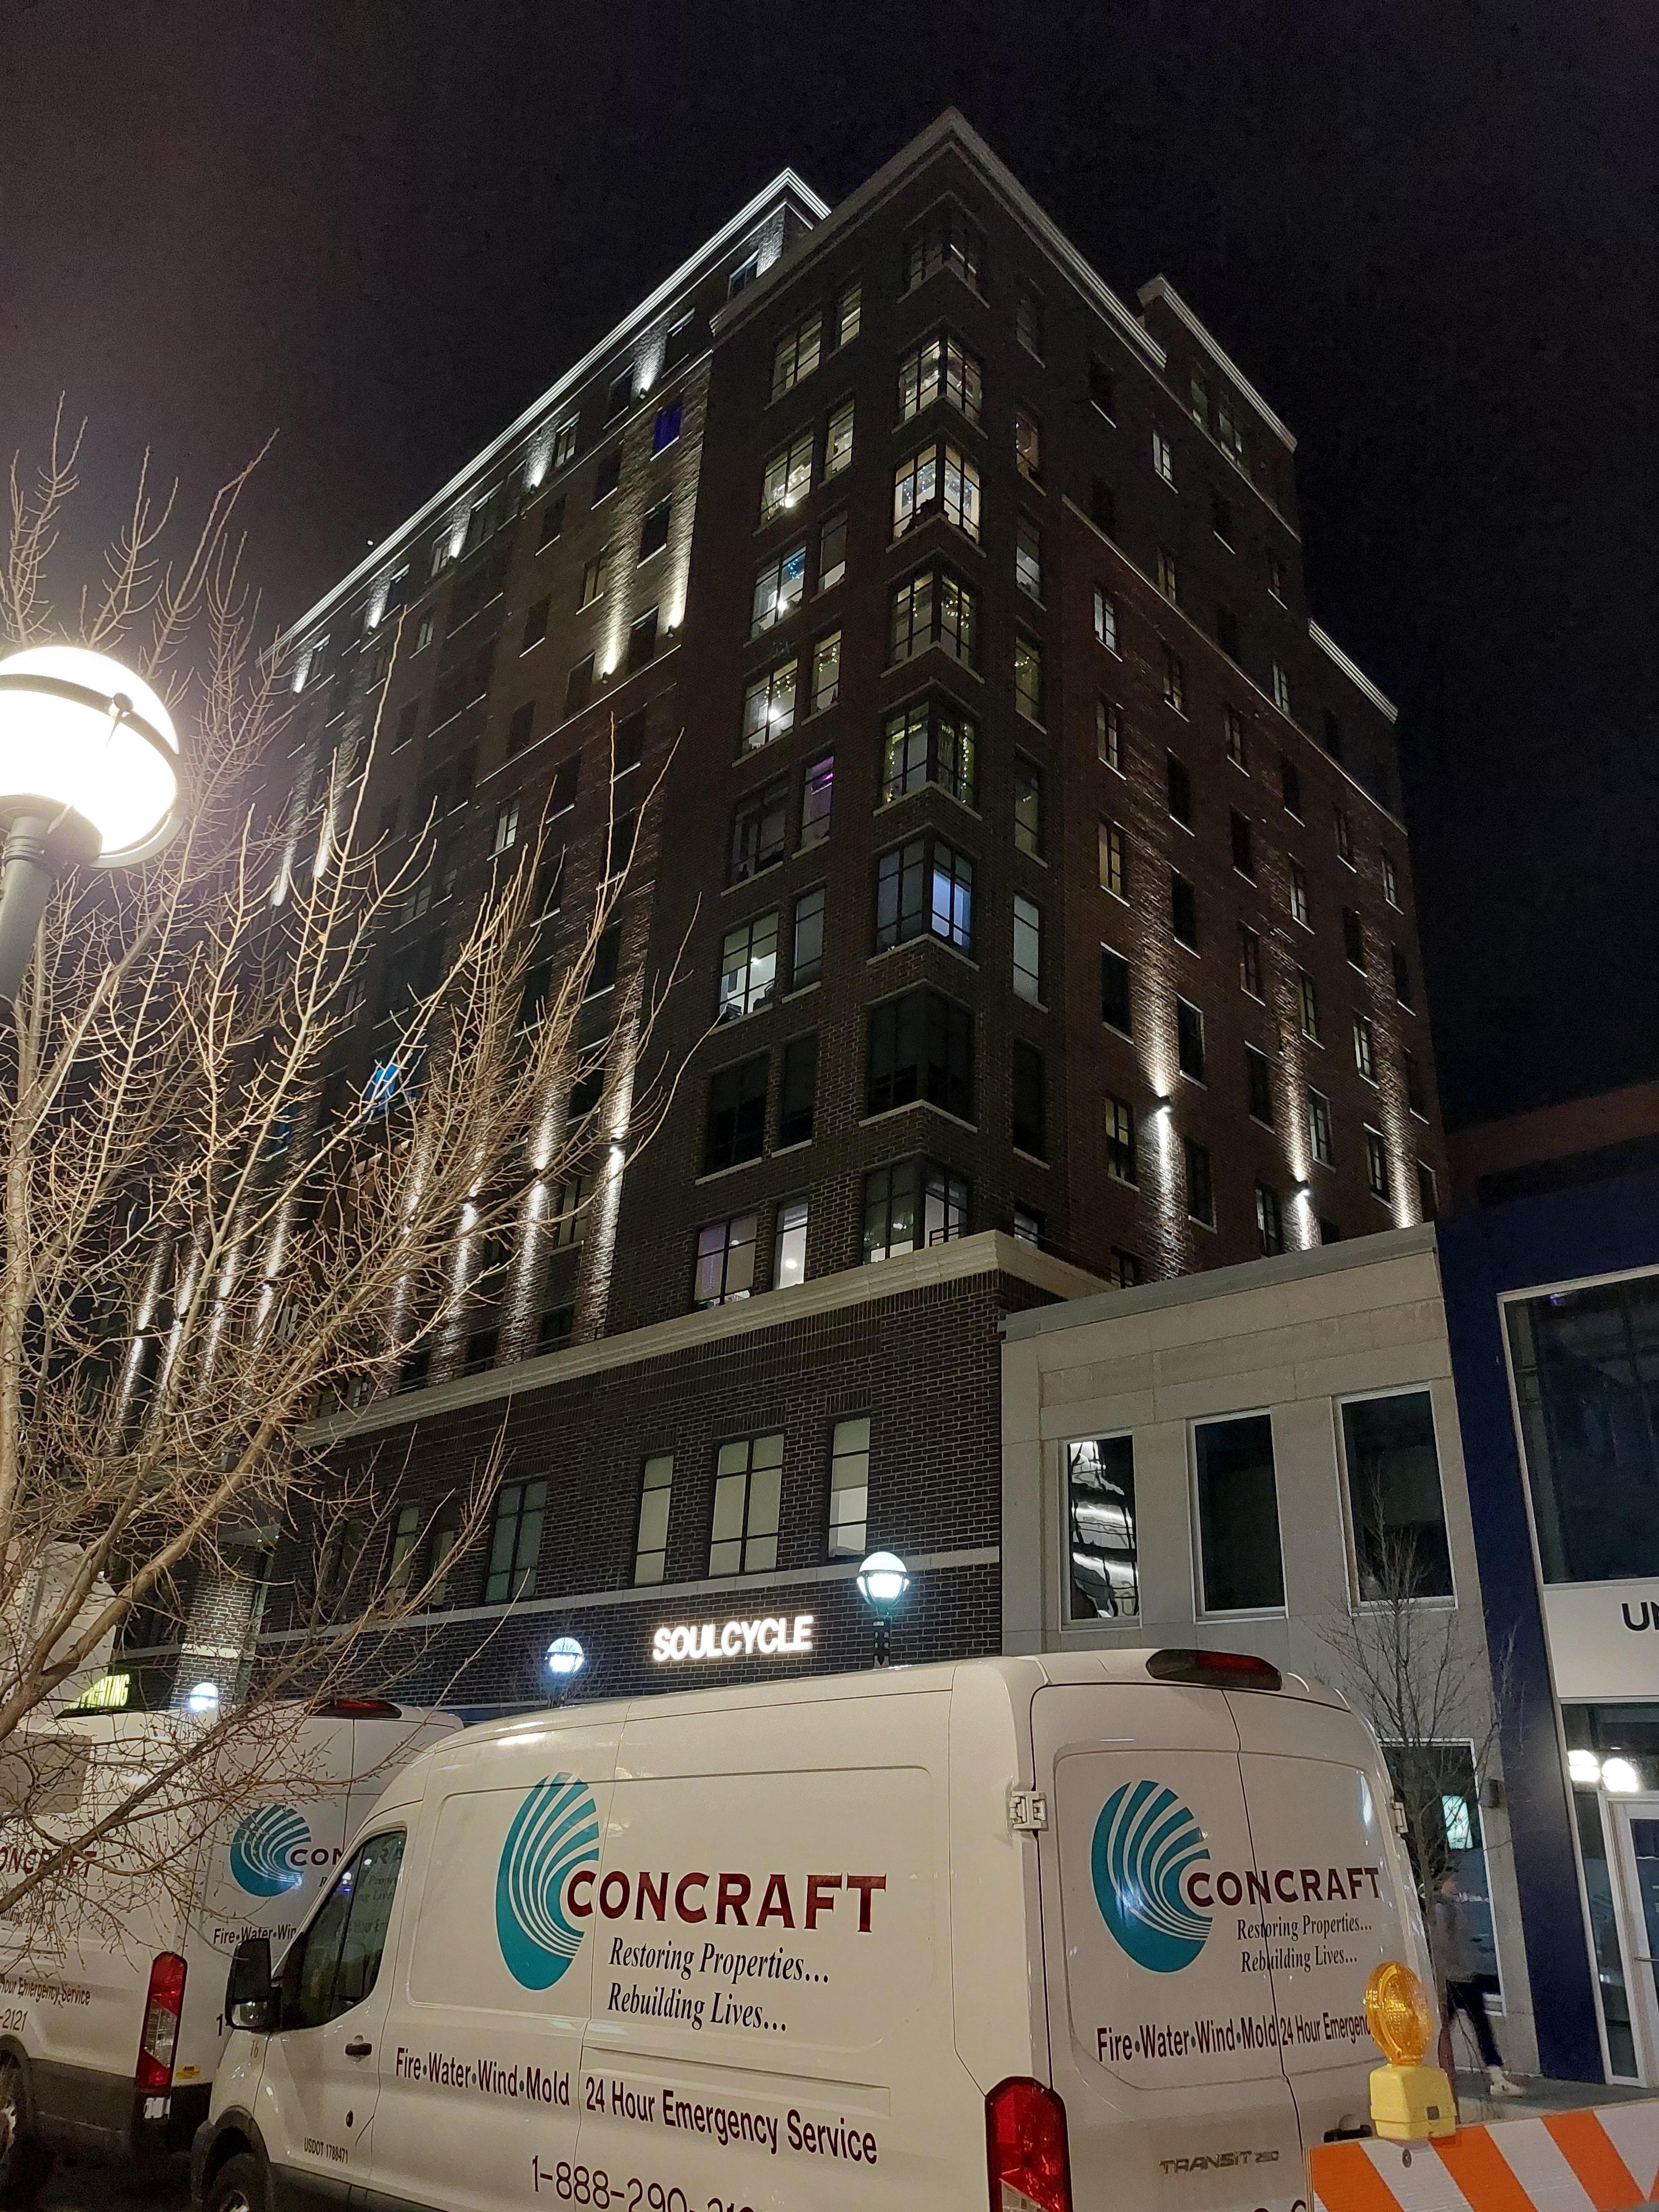 High Rise Apartment - Concraft arrives to Emergency